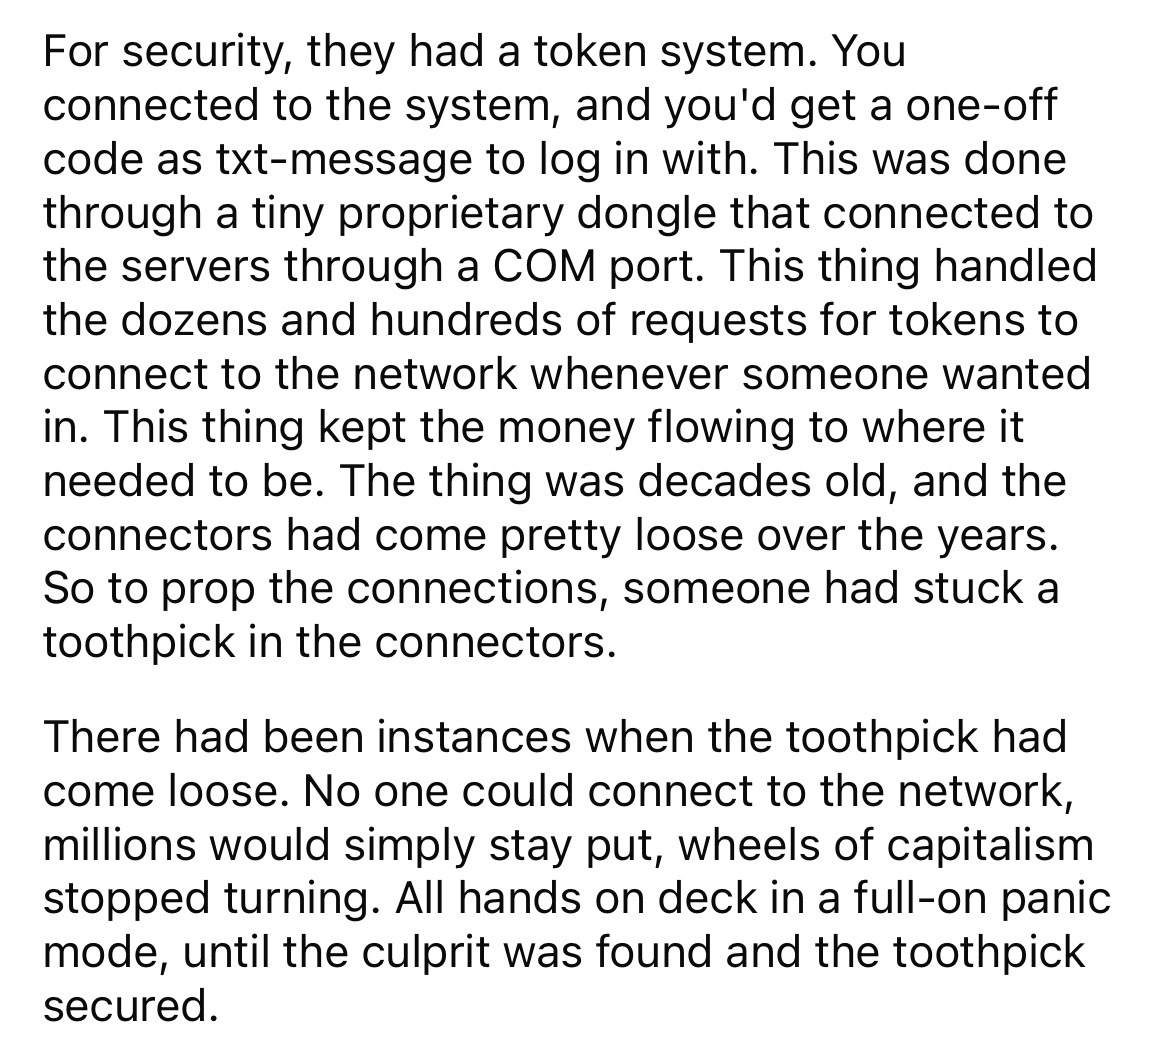 document - For security, they had a token system. You connected to the system, and you'd get a oneoff code as txtmessage to log in with. This was done through a tiny proprietary dongle that connected to the servers through a Com port. This thing handled t